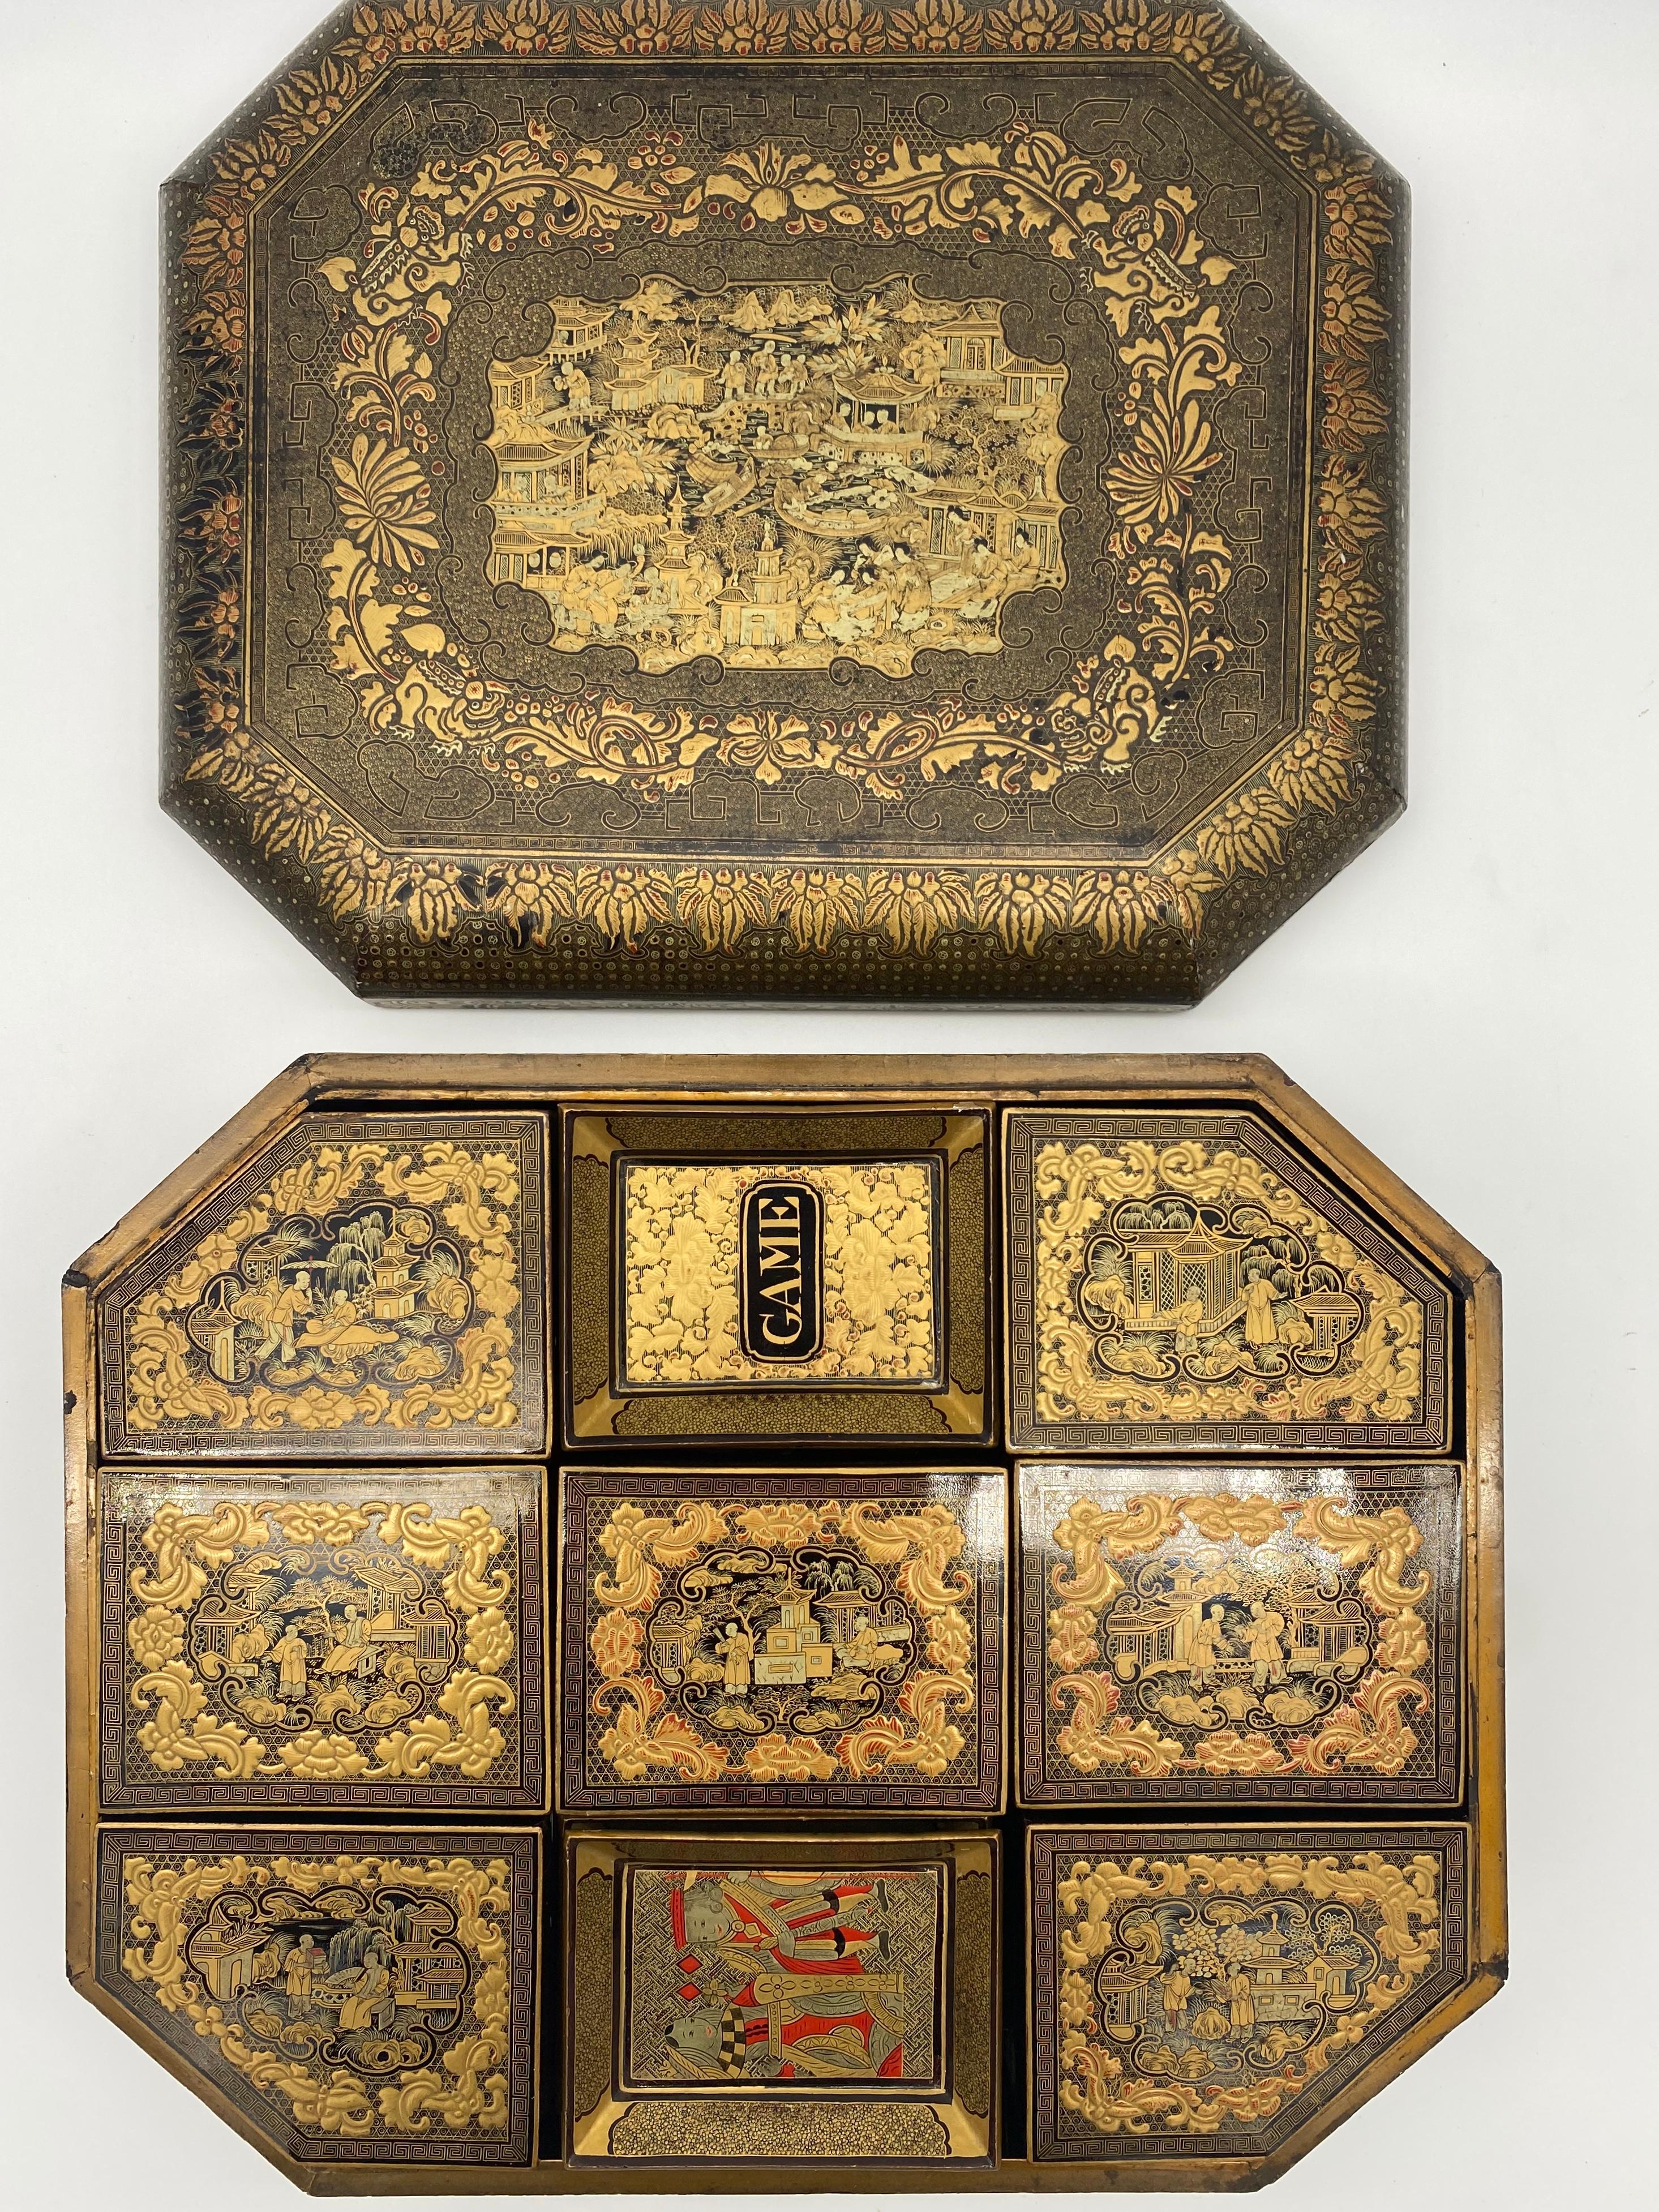 Antique 19th Century Export Chinese Lacquer Gaming Box For Sale 4